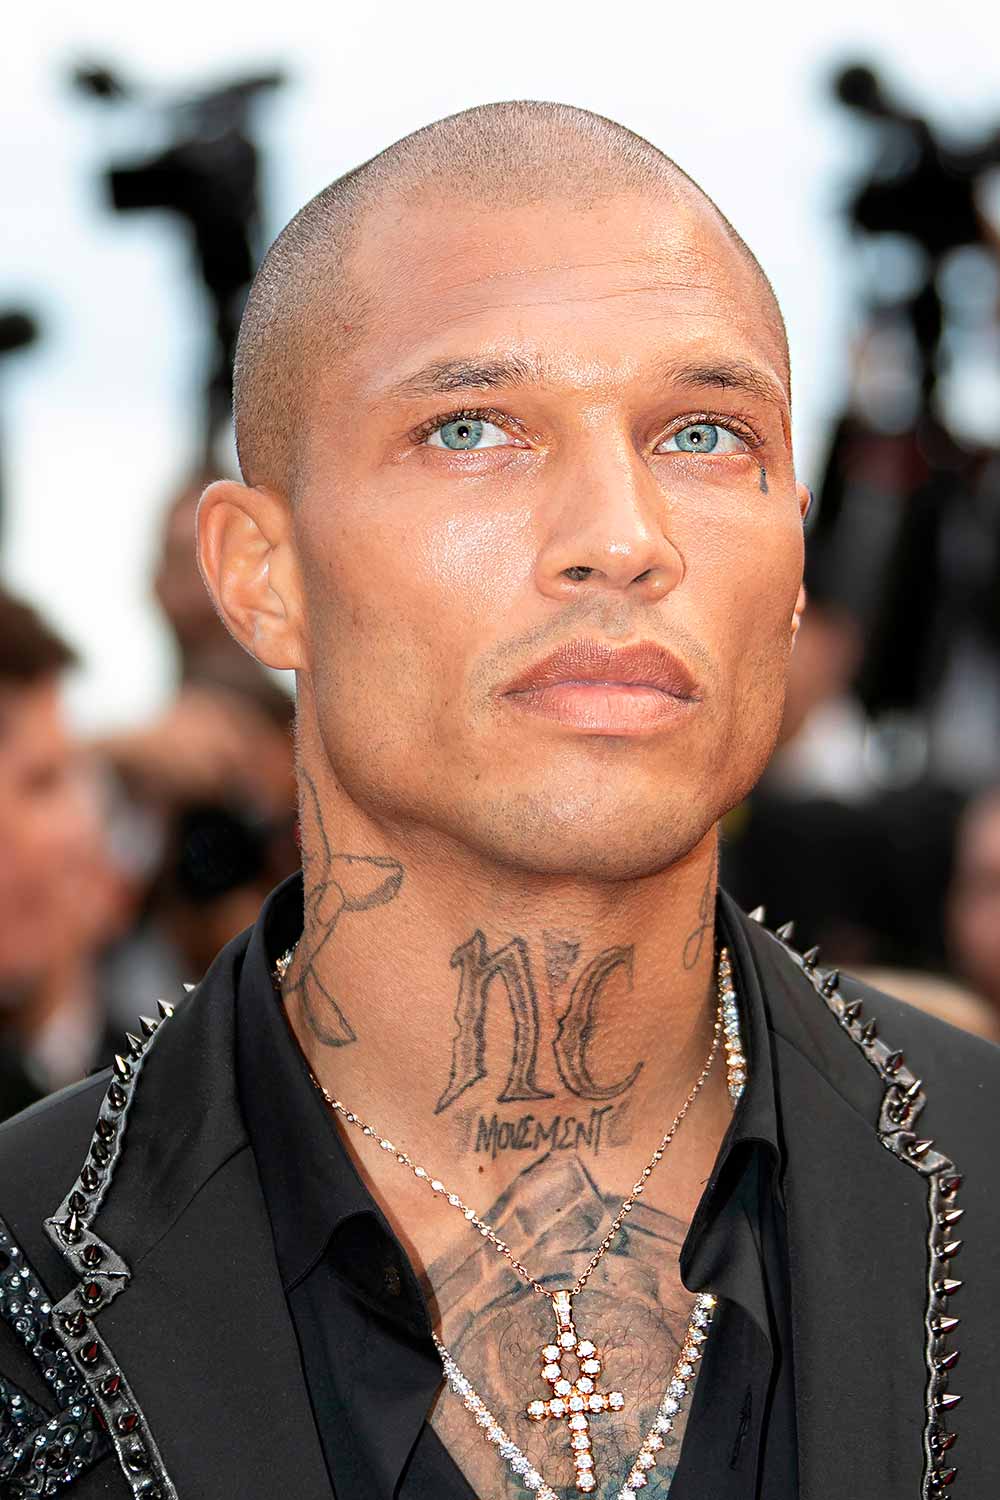 Number 1 Haircut Jeremy Meeks #haircutnumbers #hairclippersizes